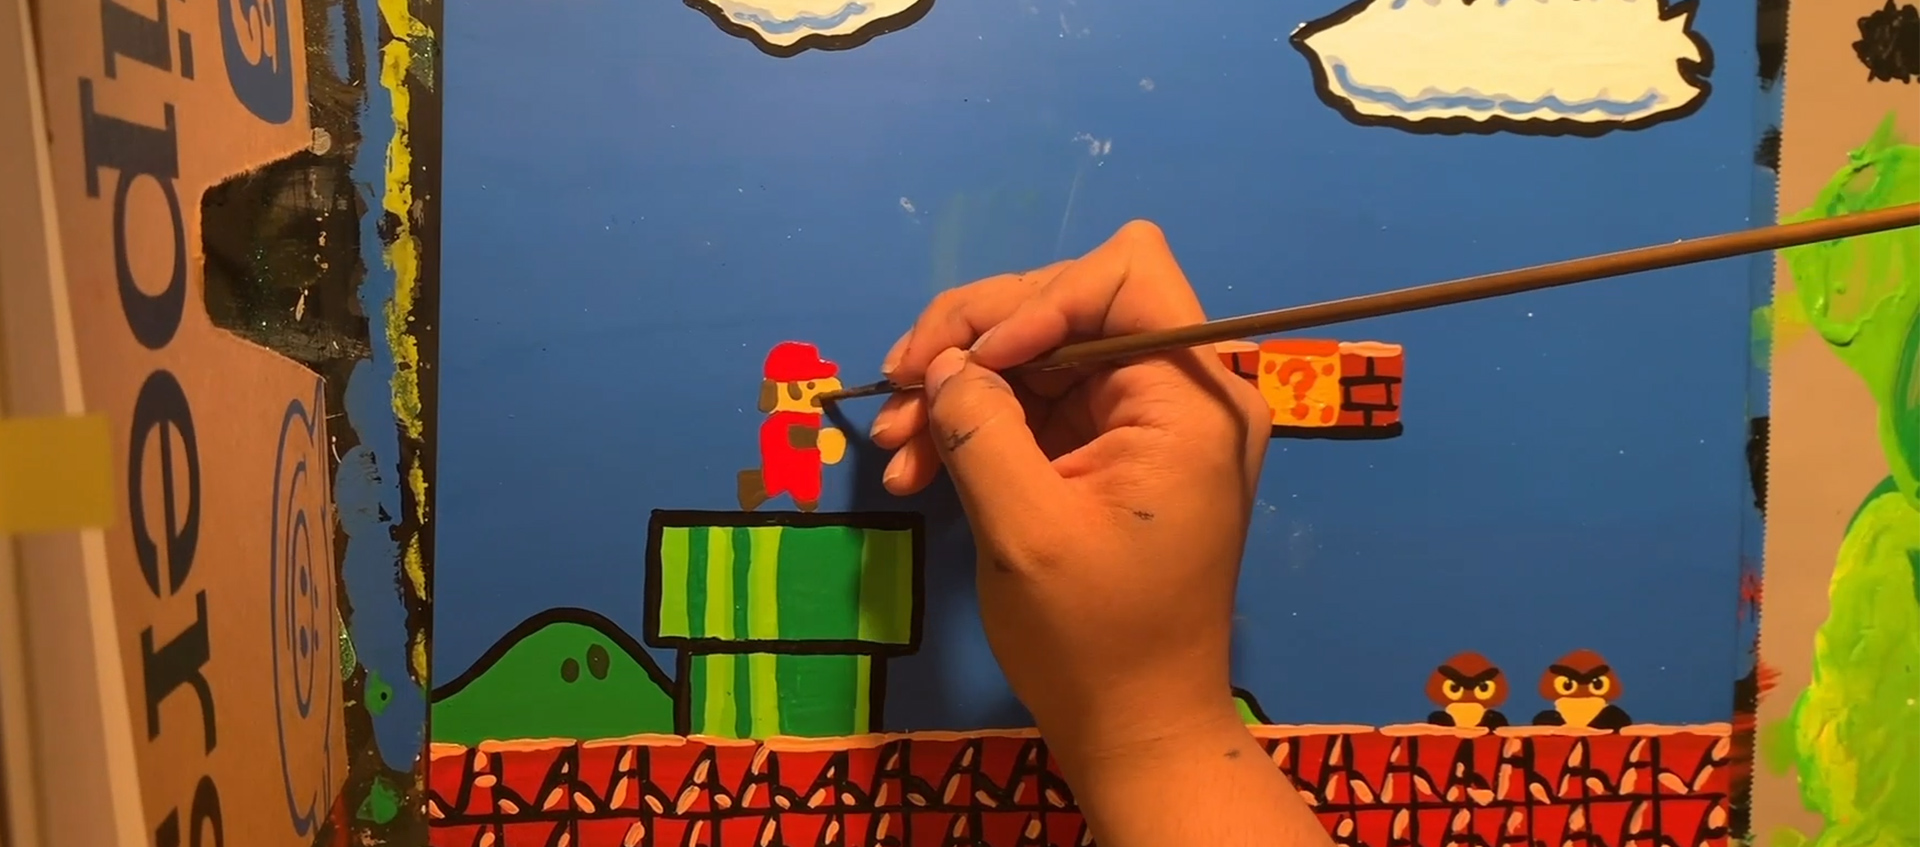 Artist Bethani Blake paints a miniature environment inspired by Original Mario Bros videogame